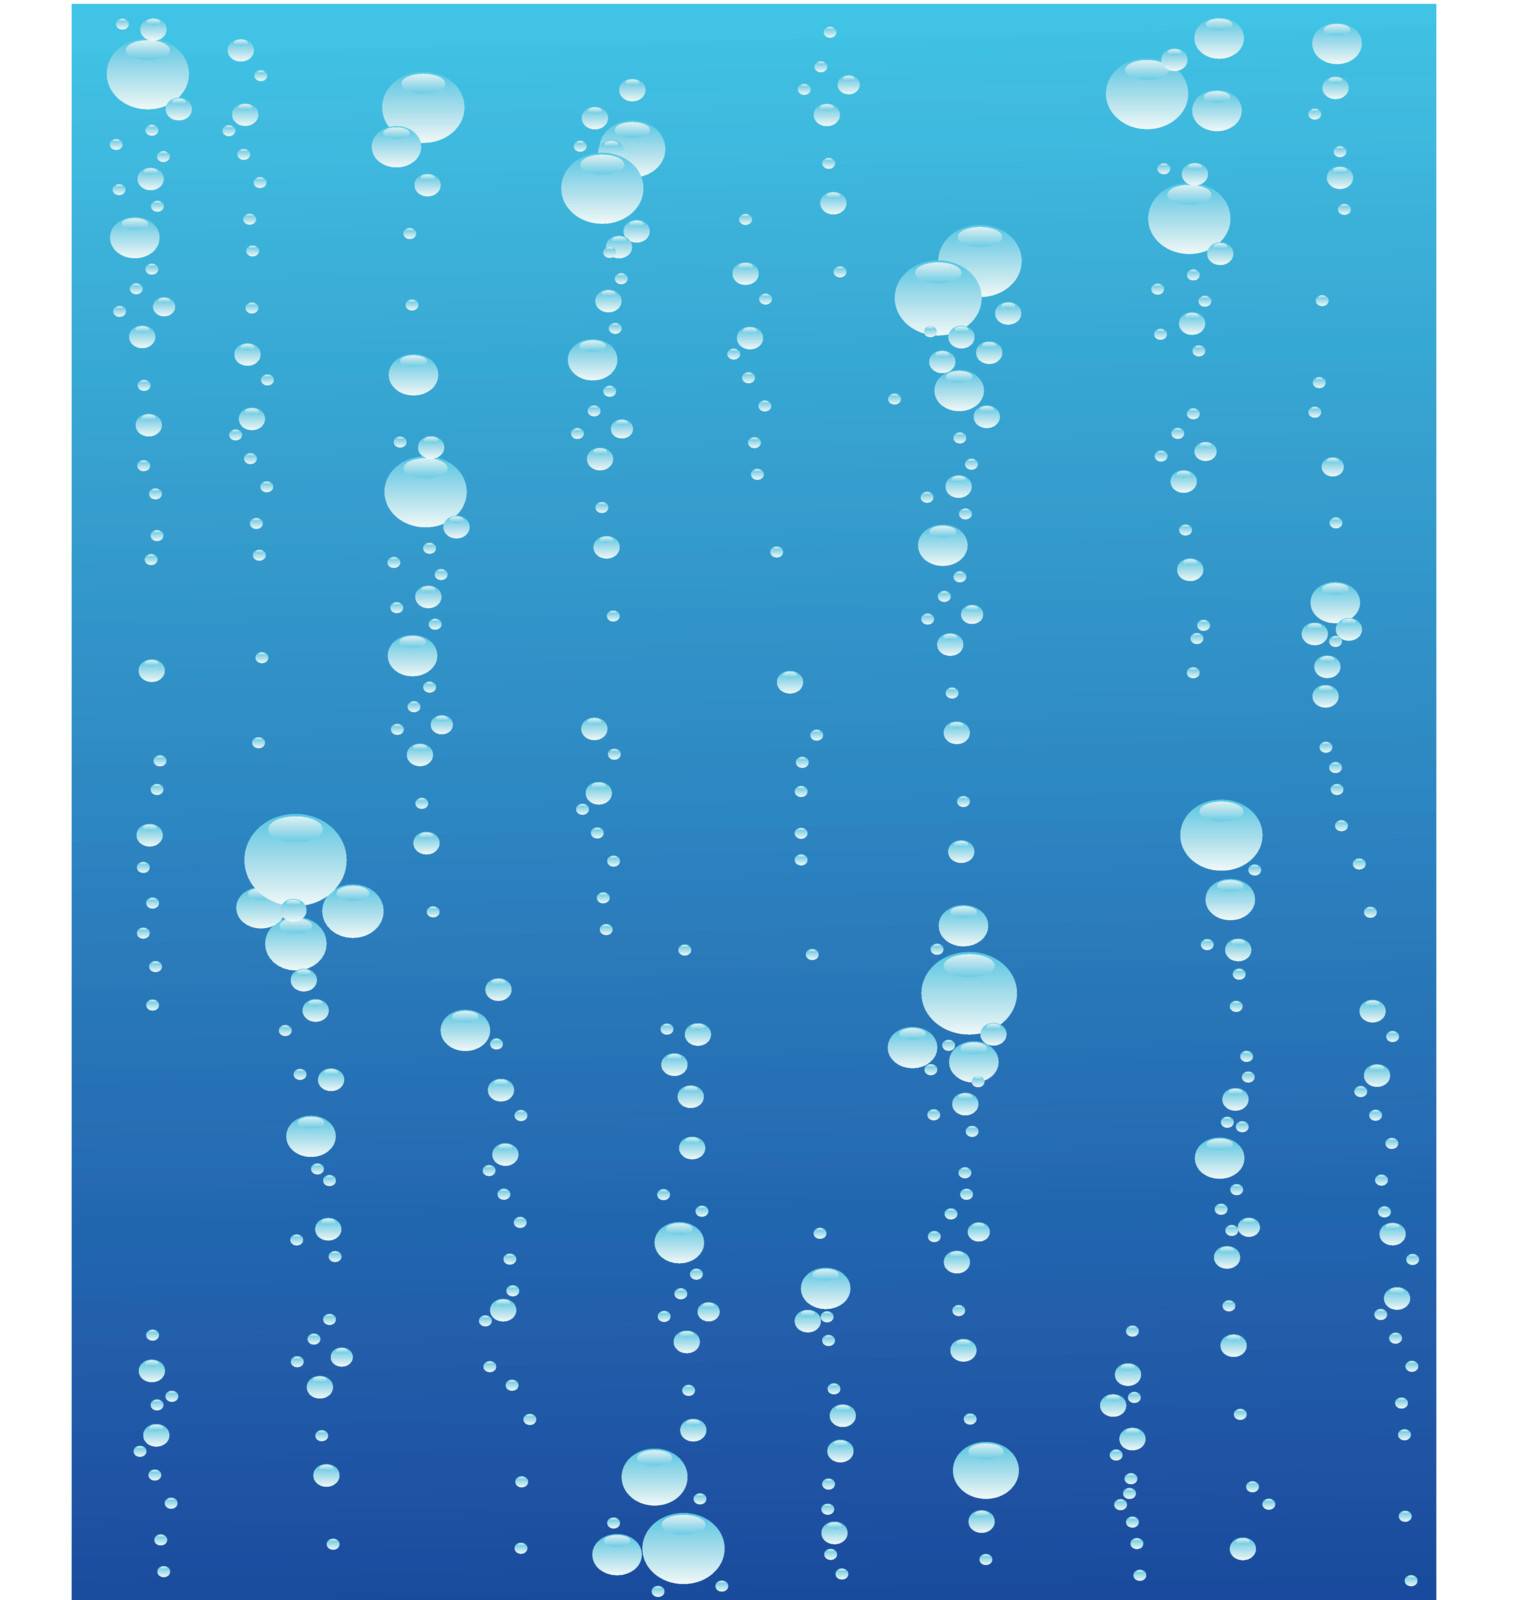 vector illustration of Water bubble